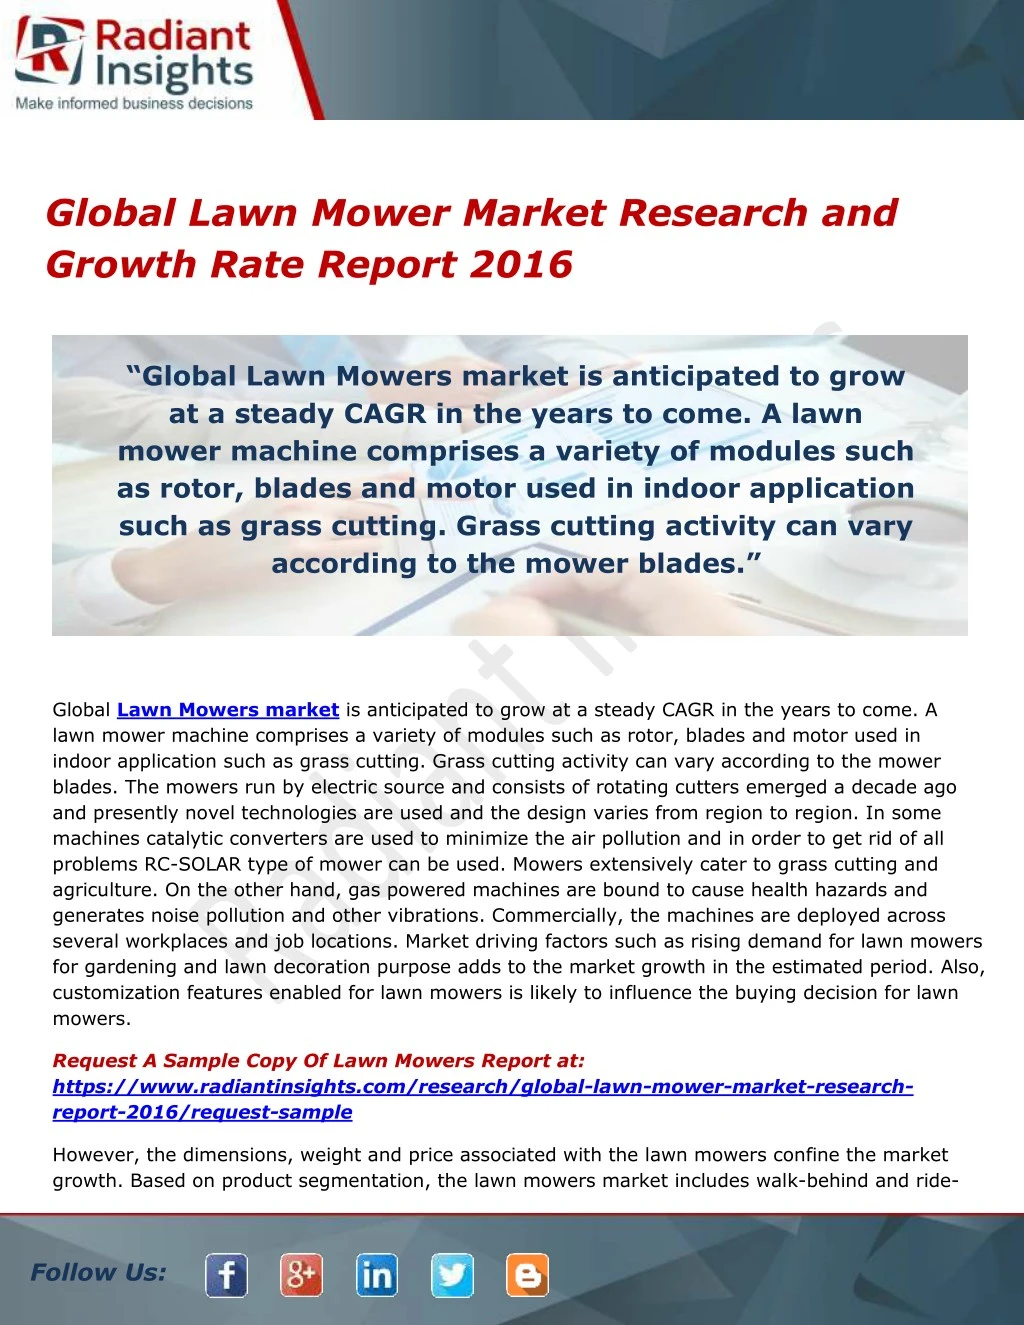 global lawn mower market research and growth rate